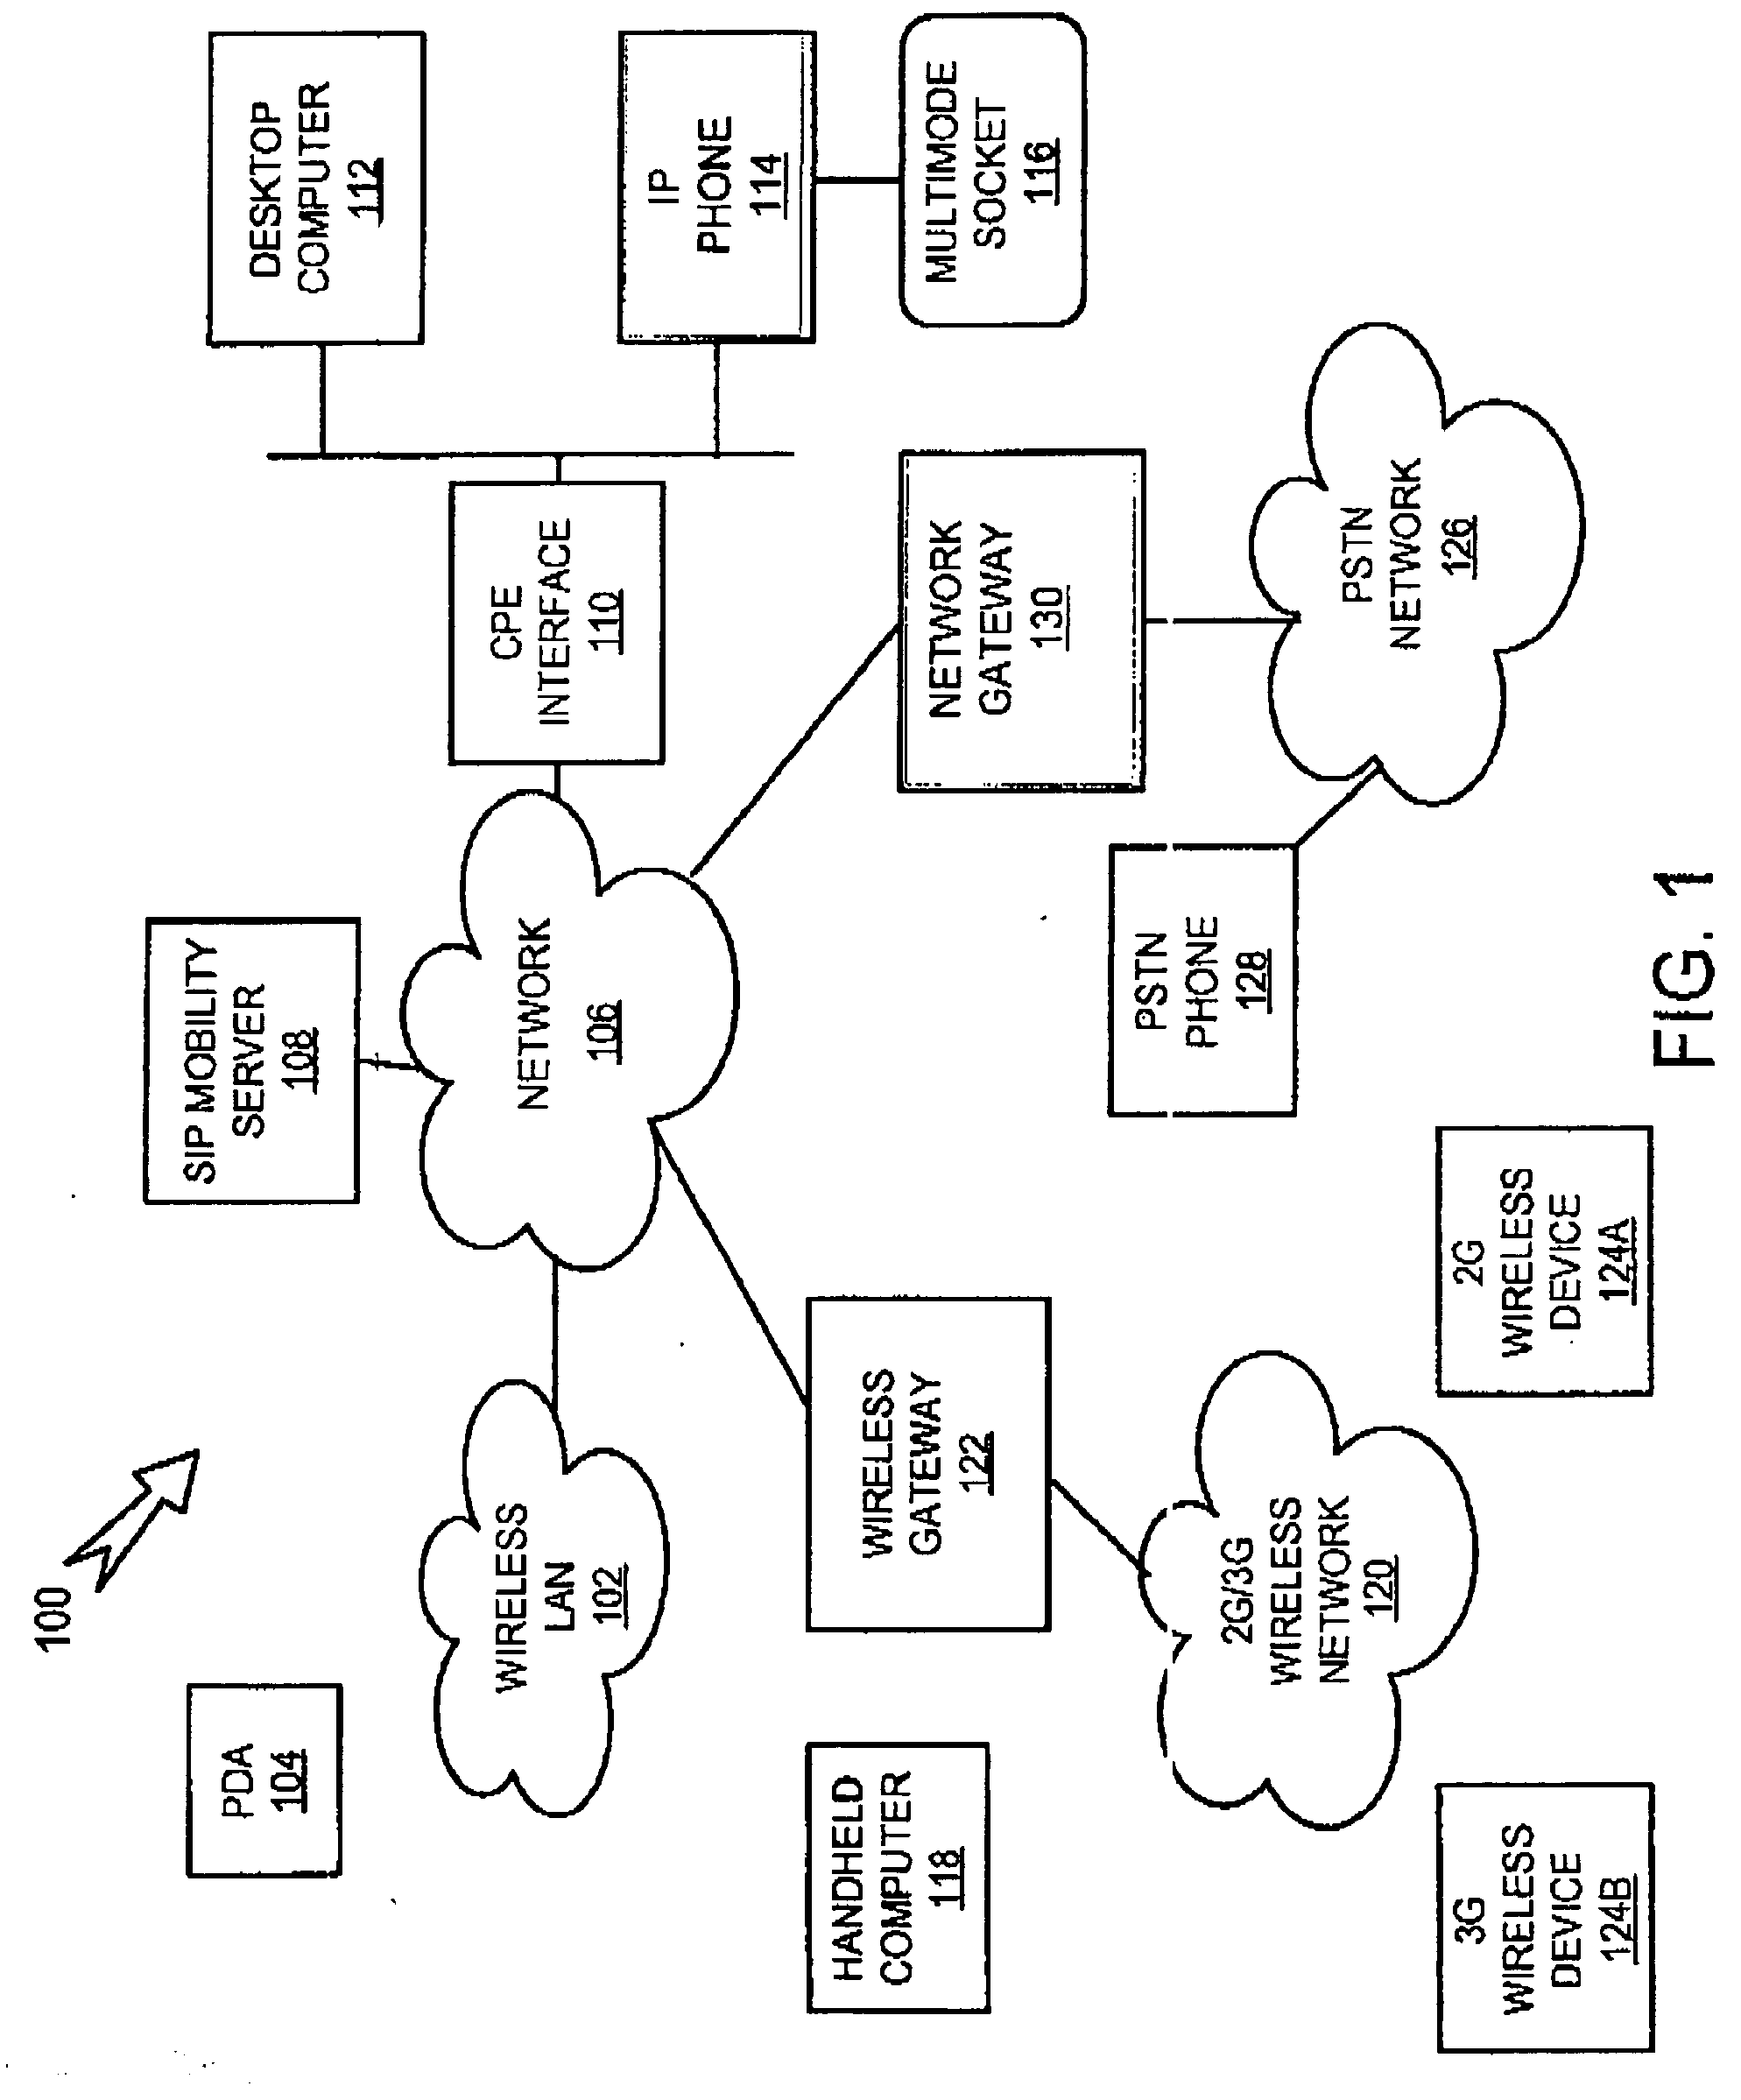 Fixed-mobile communications with mid-session mode switching